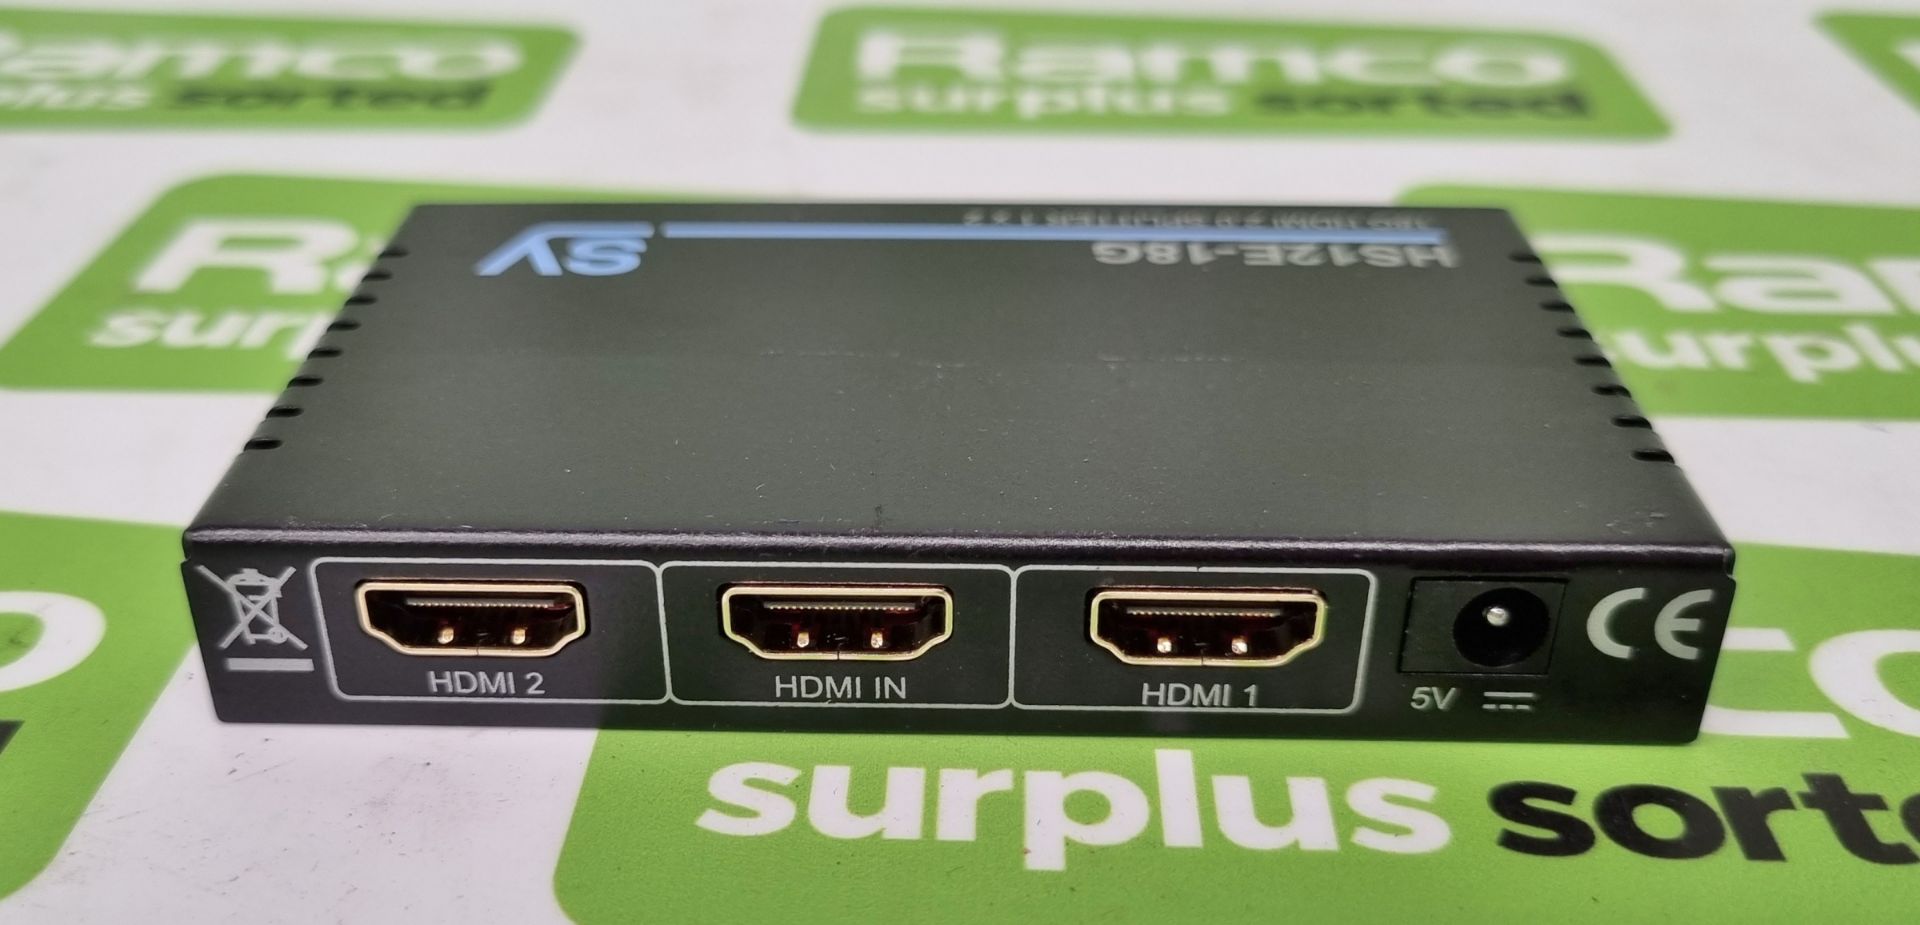 SY-HS12E-18G 1x2 HDMI 2.0 (18Gbps) splitter - Image 5 of 9